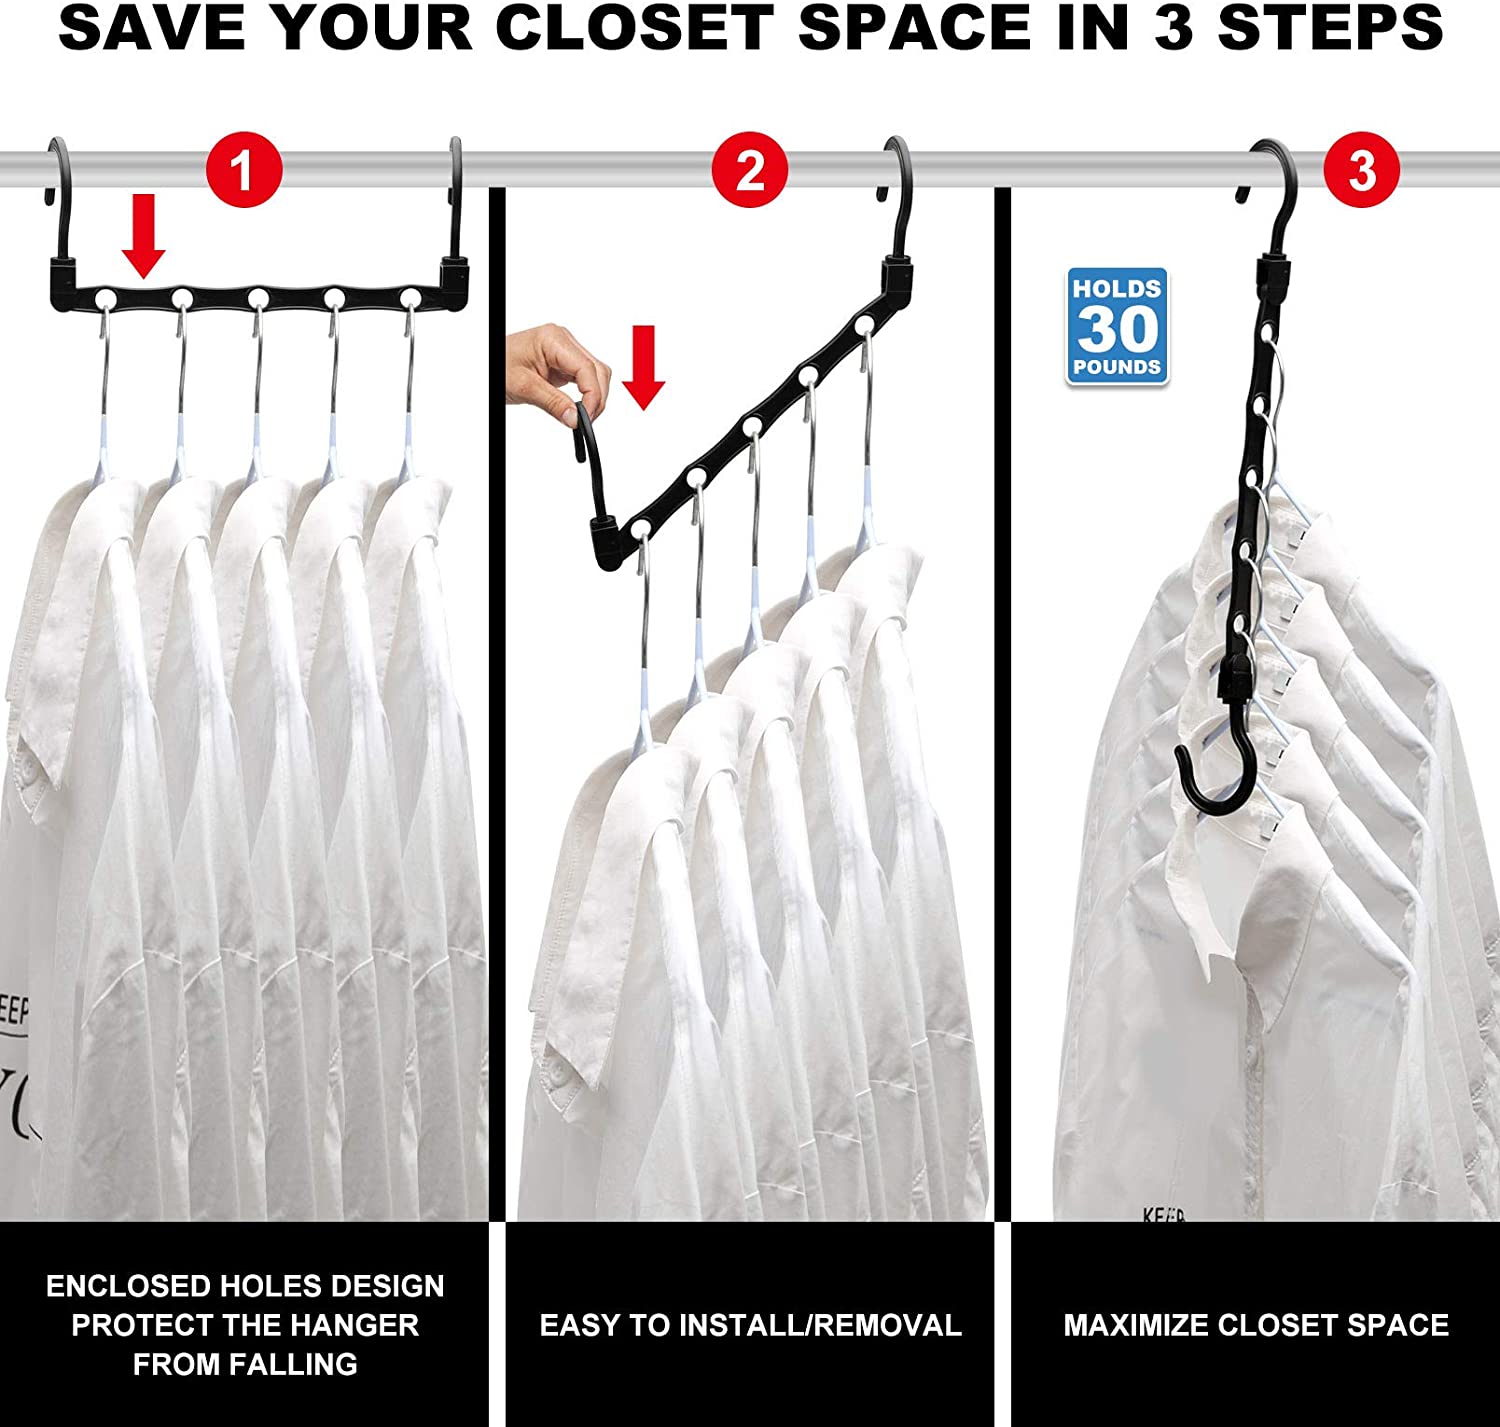 Save room in your closet